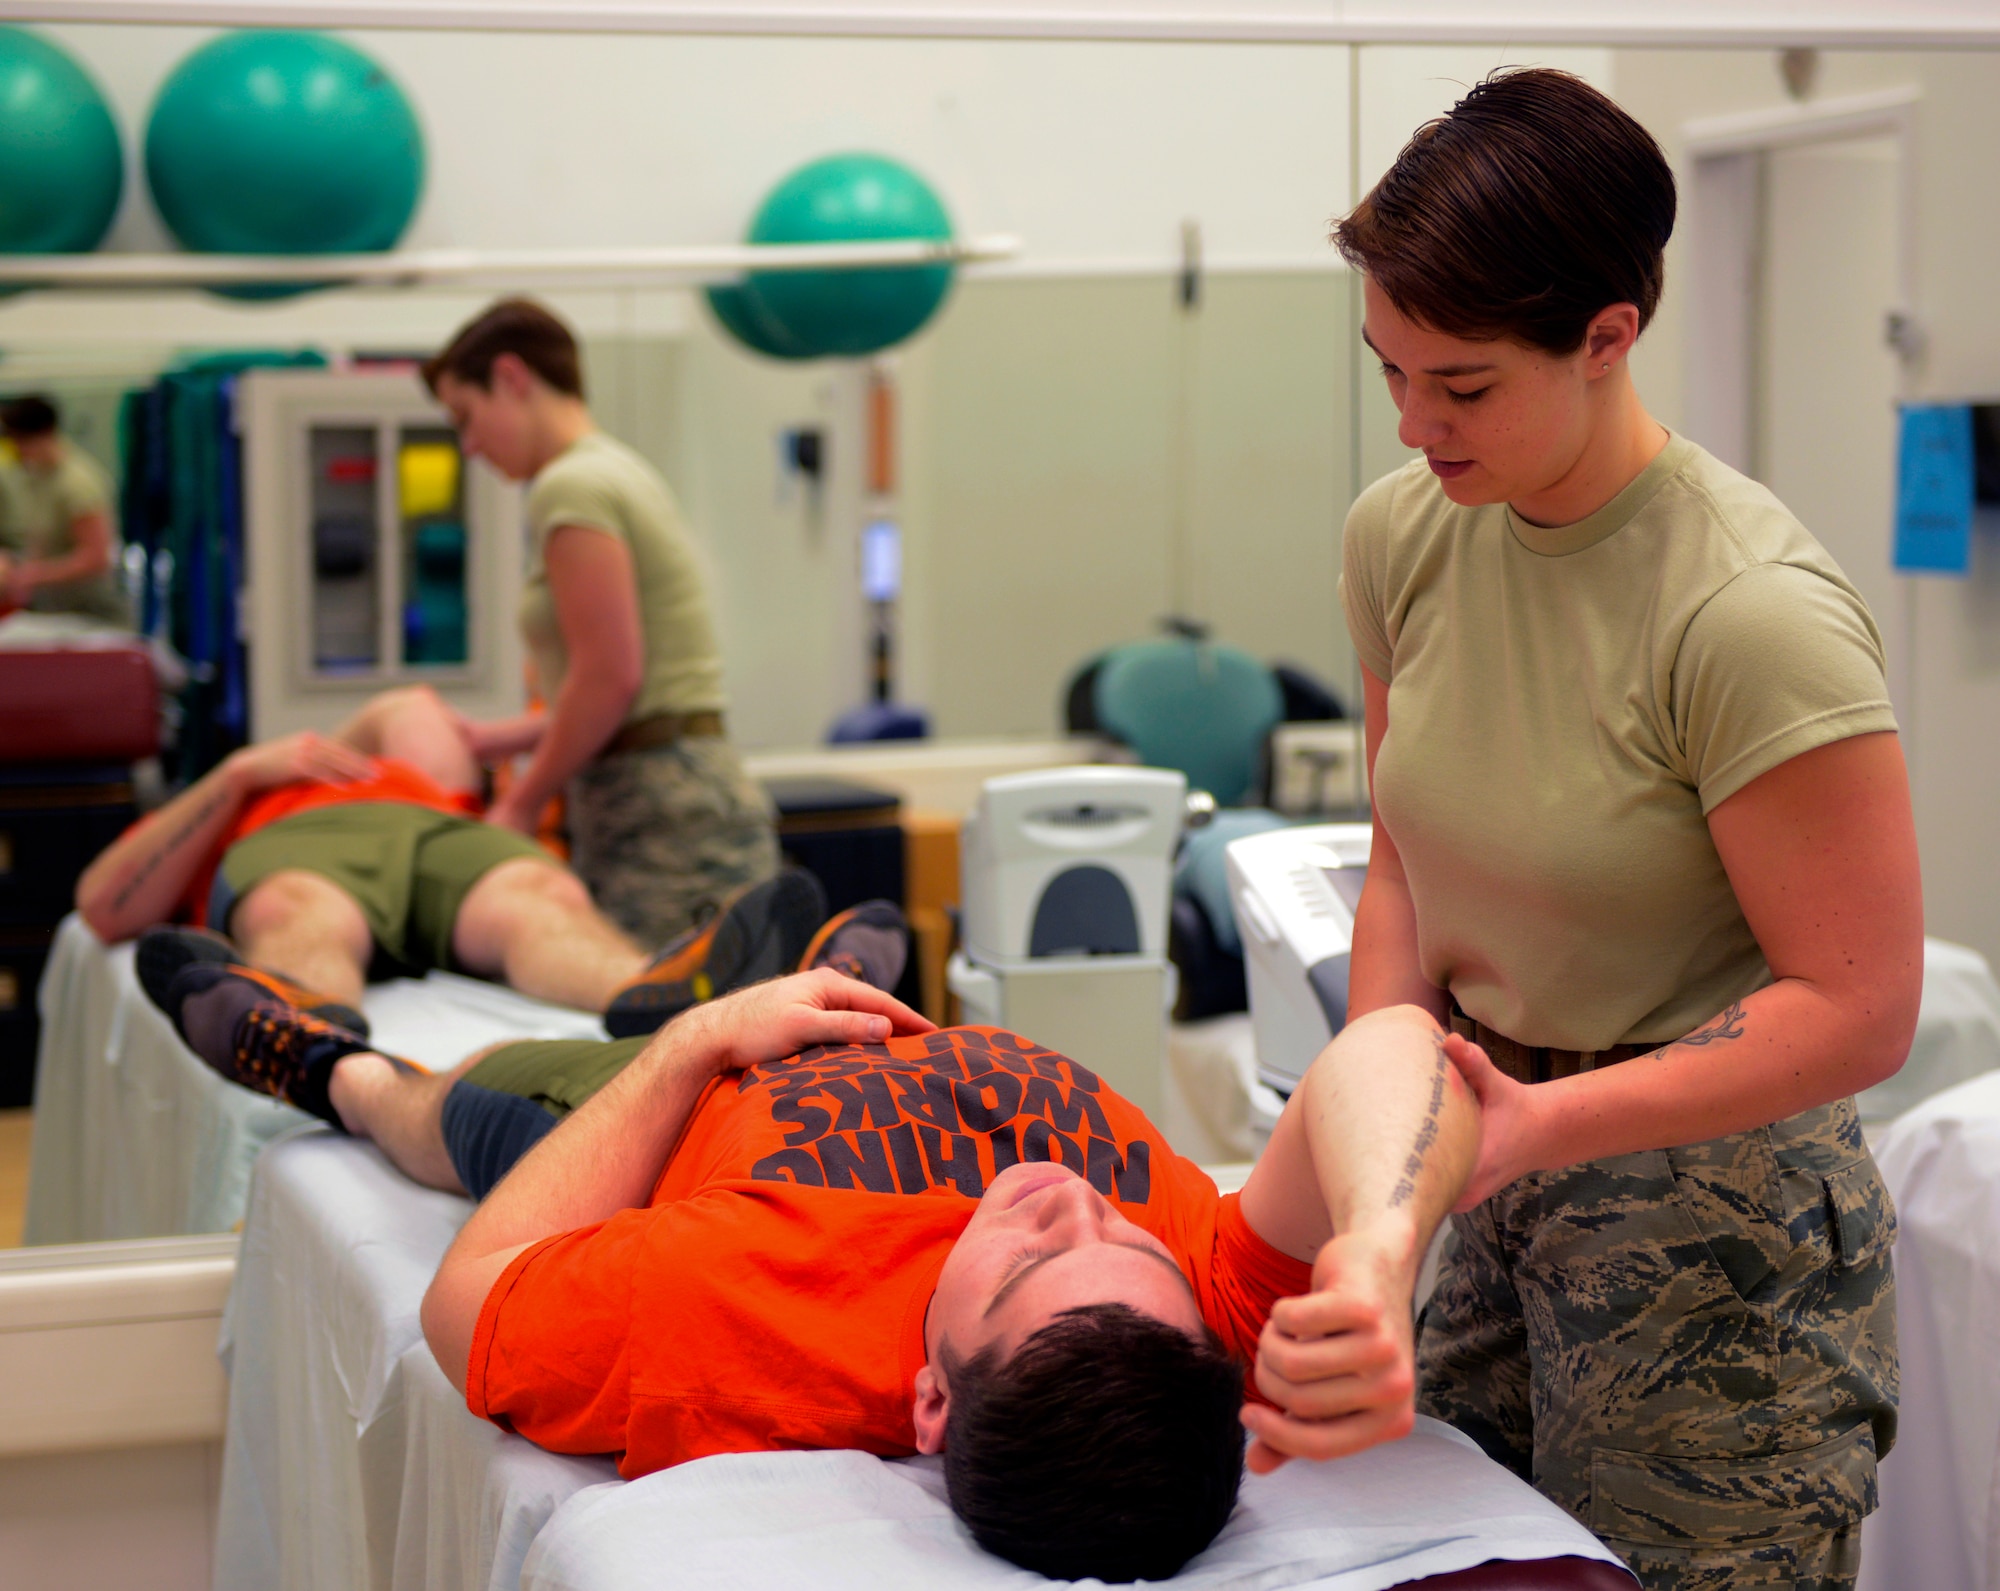 Staff Sgt. Sage Summers, 86th Medical Operations Squadron physical therapy technician, helps her patient, Staff Sgt. Bryan Bevard, 86th Operations Support Squadron, through his physical therapy session Feb. 3, 2016, at Ramstein Air Base, Germany. Patients are treated by being guided through their recovery until they are fully fit. (U.S. Air Force photo/Tech. Sgt. Kristopher Levasseur)